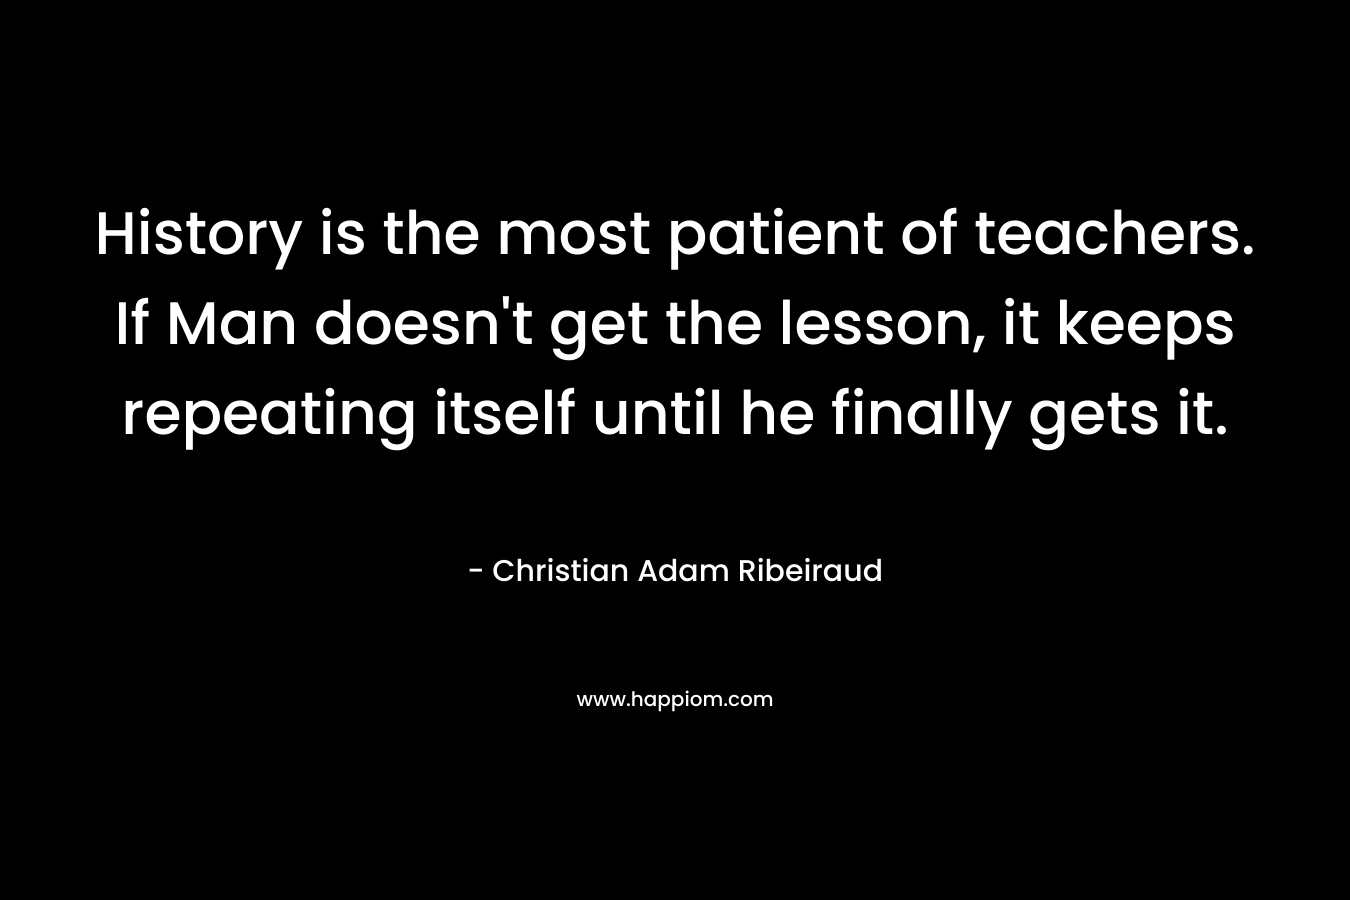 History is the most patient of teachers. If Man doesn't get the lesson, it keeps repeating itself until he finally gets it.